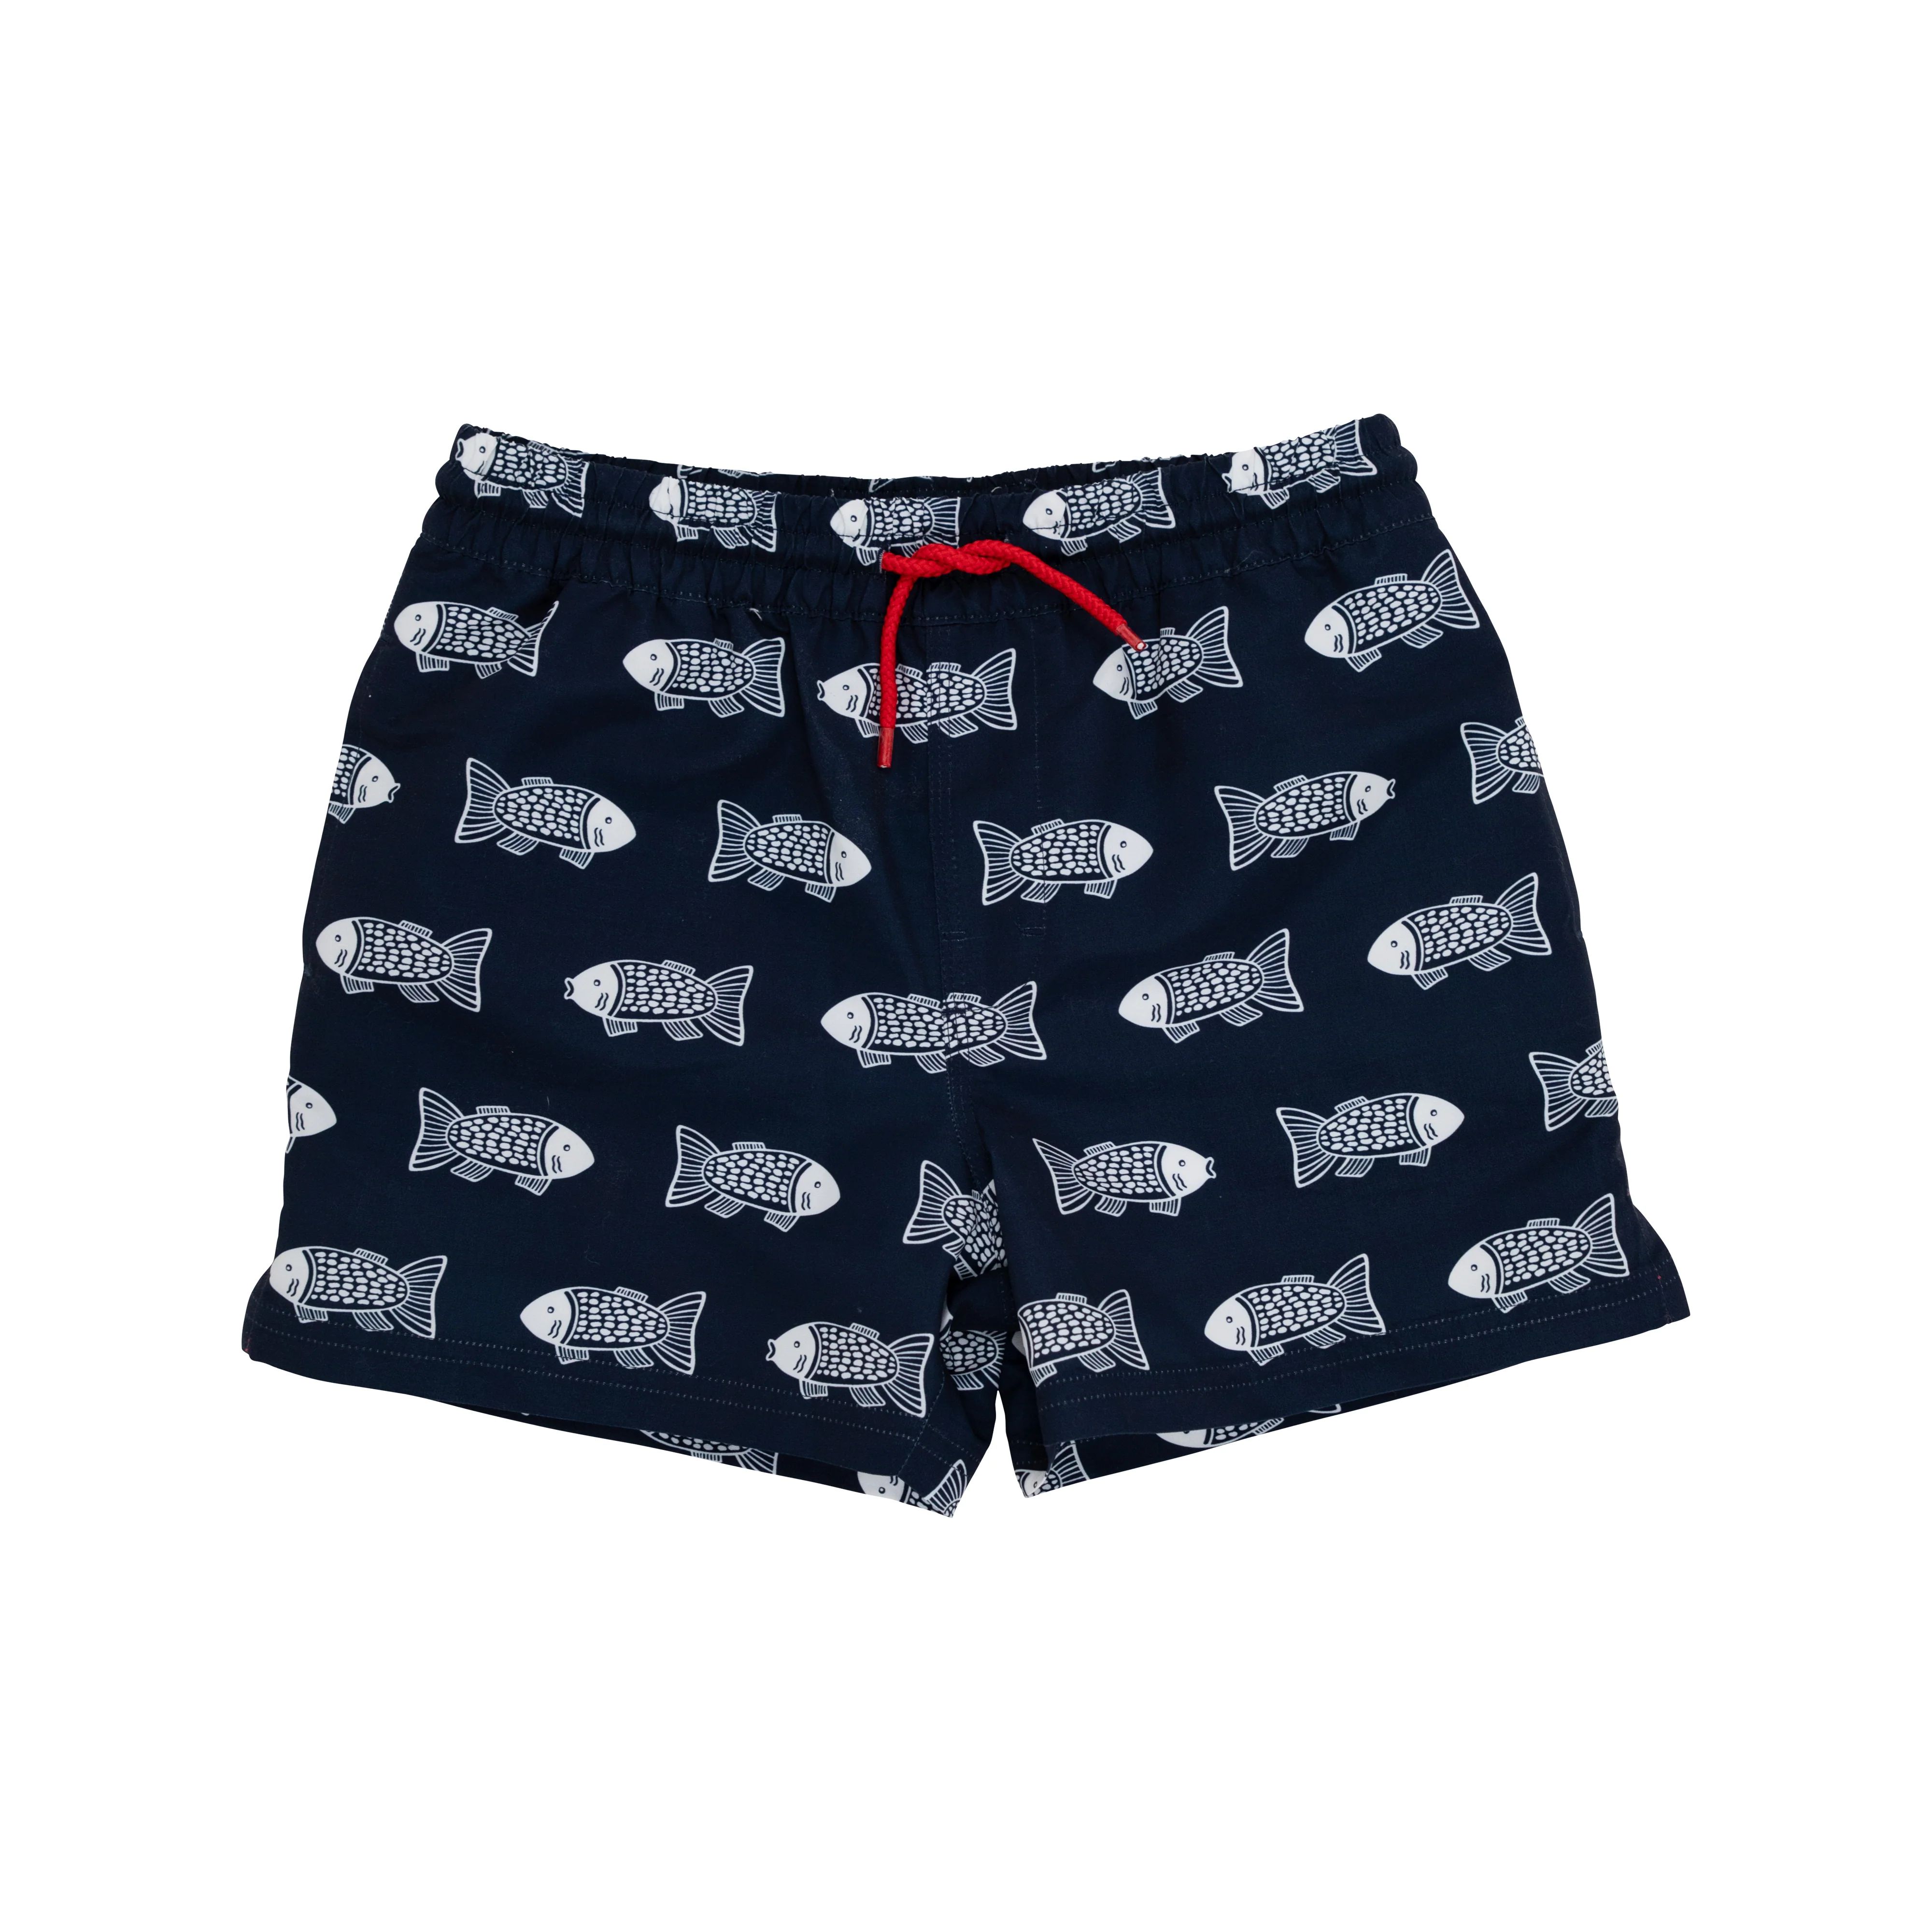 Tortola Trunks - Fairfield Fish with Richmond Red | The Beaufort Bonnet Company